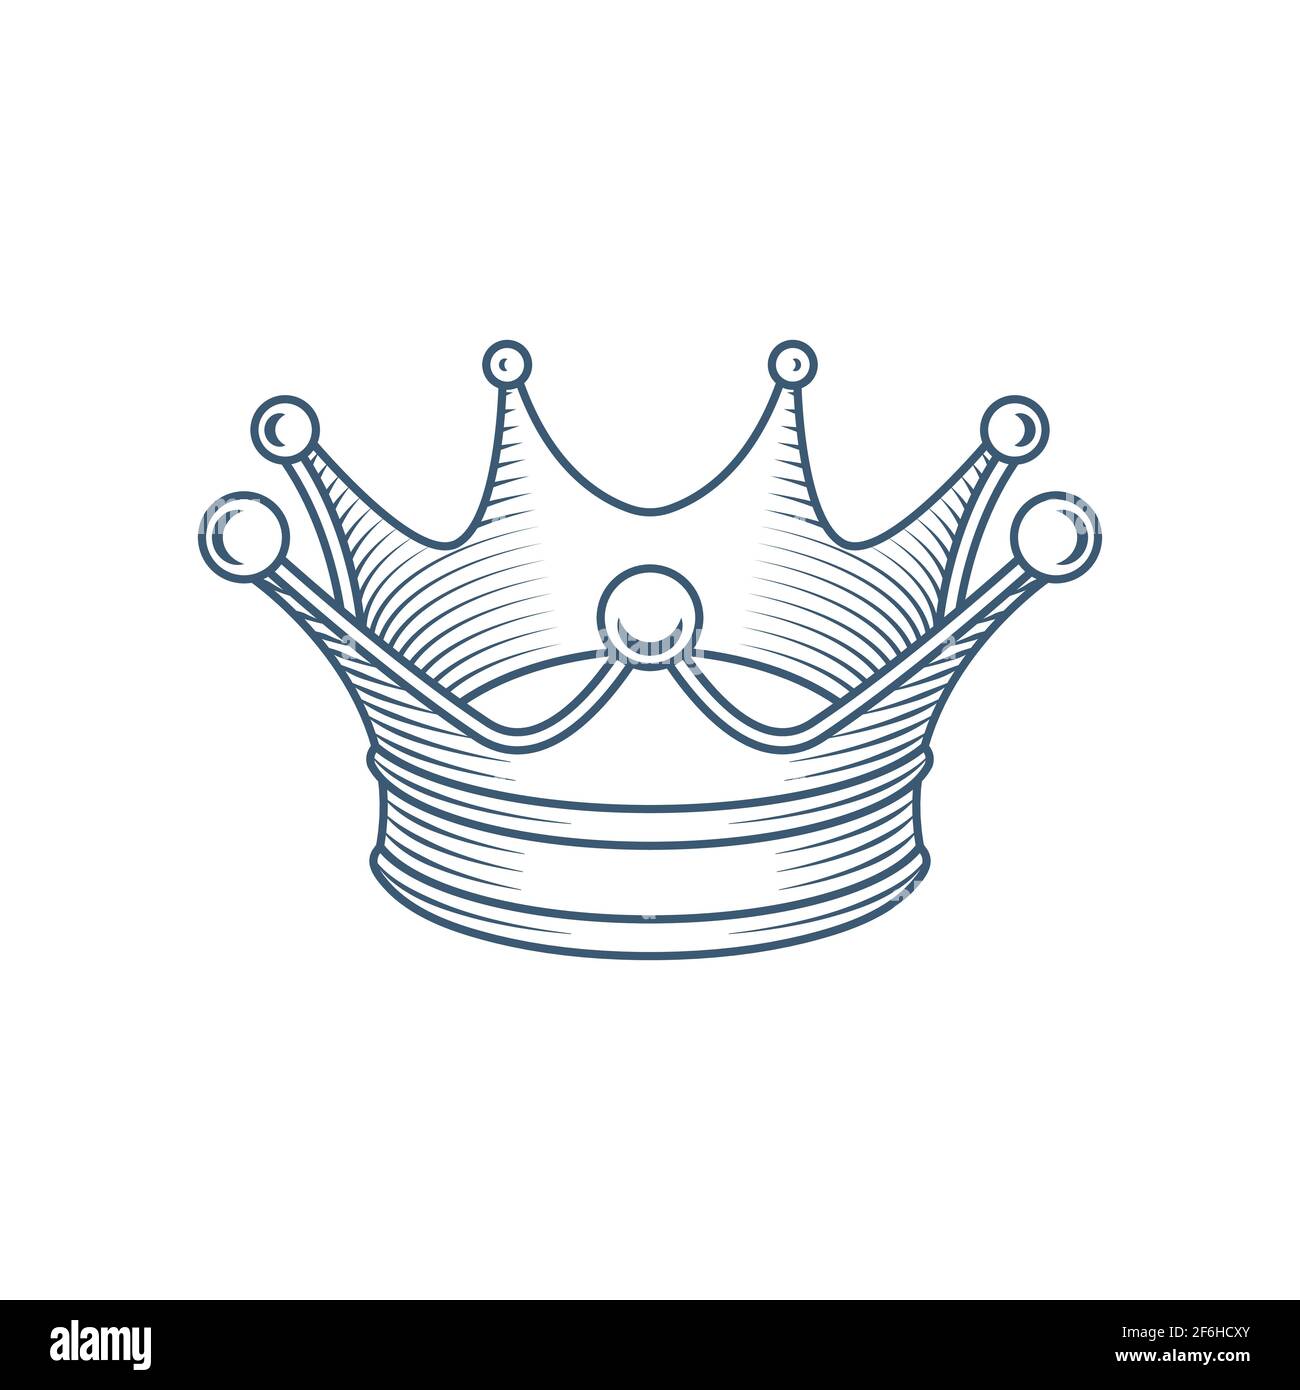 Crown. Hand drawn crown vector illustration. Vintage, engraving style crown drawing. Part of set. Stock Vector